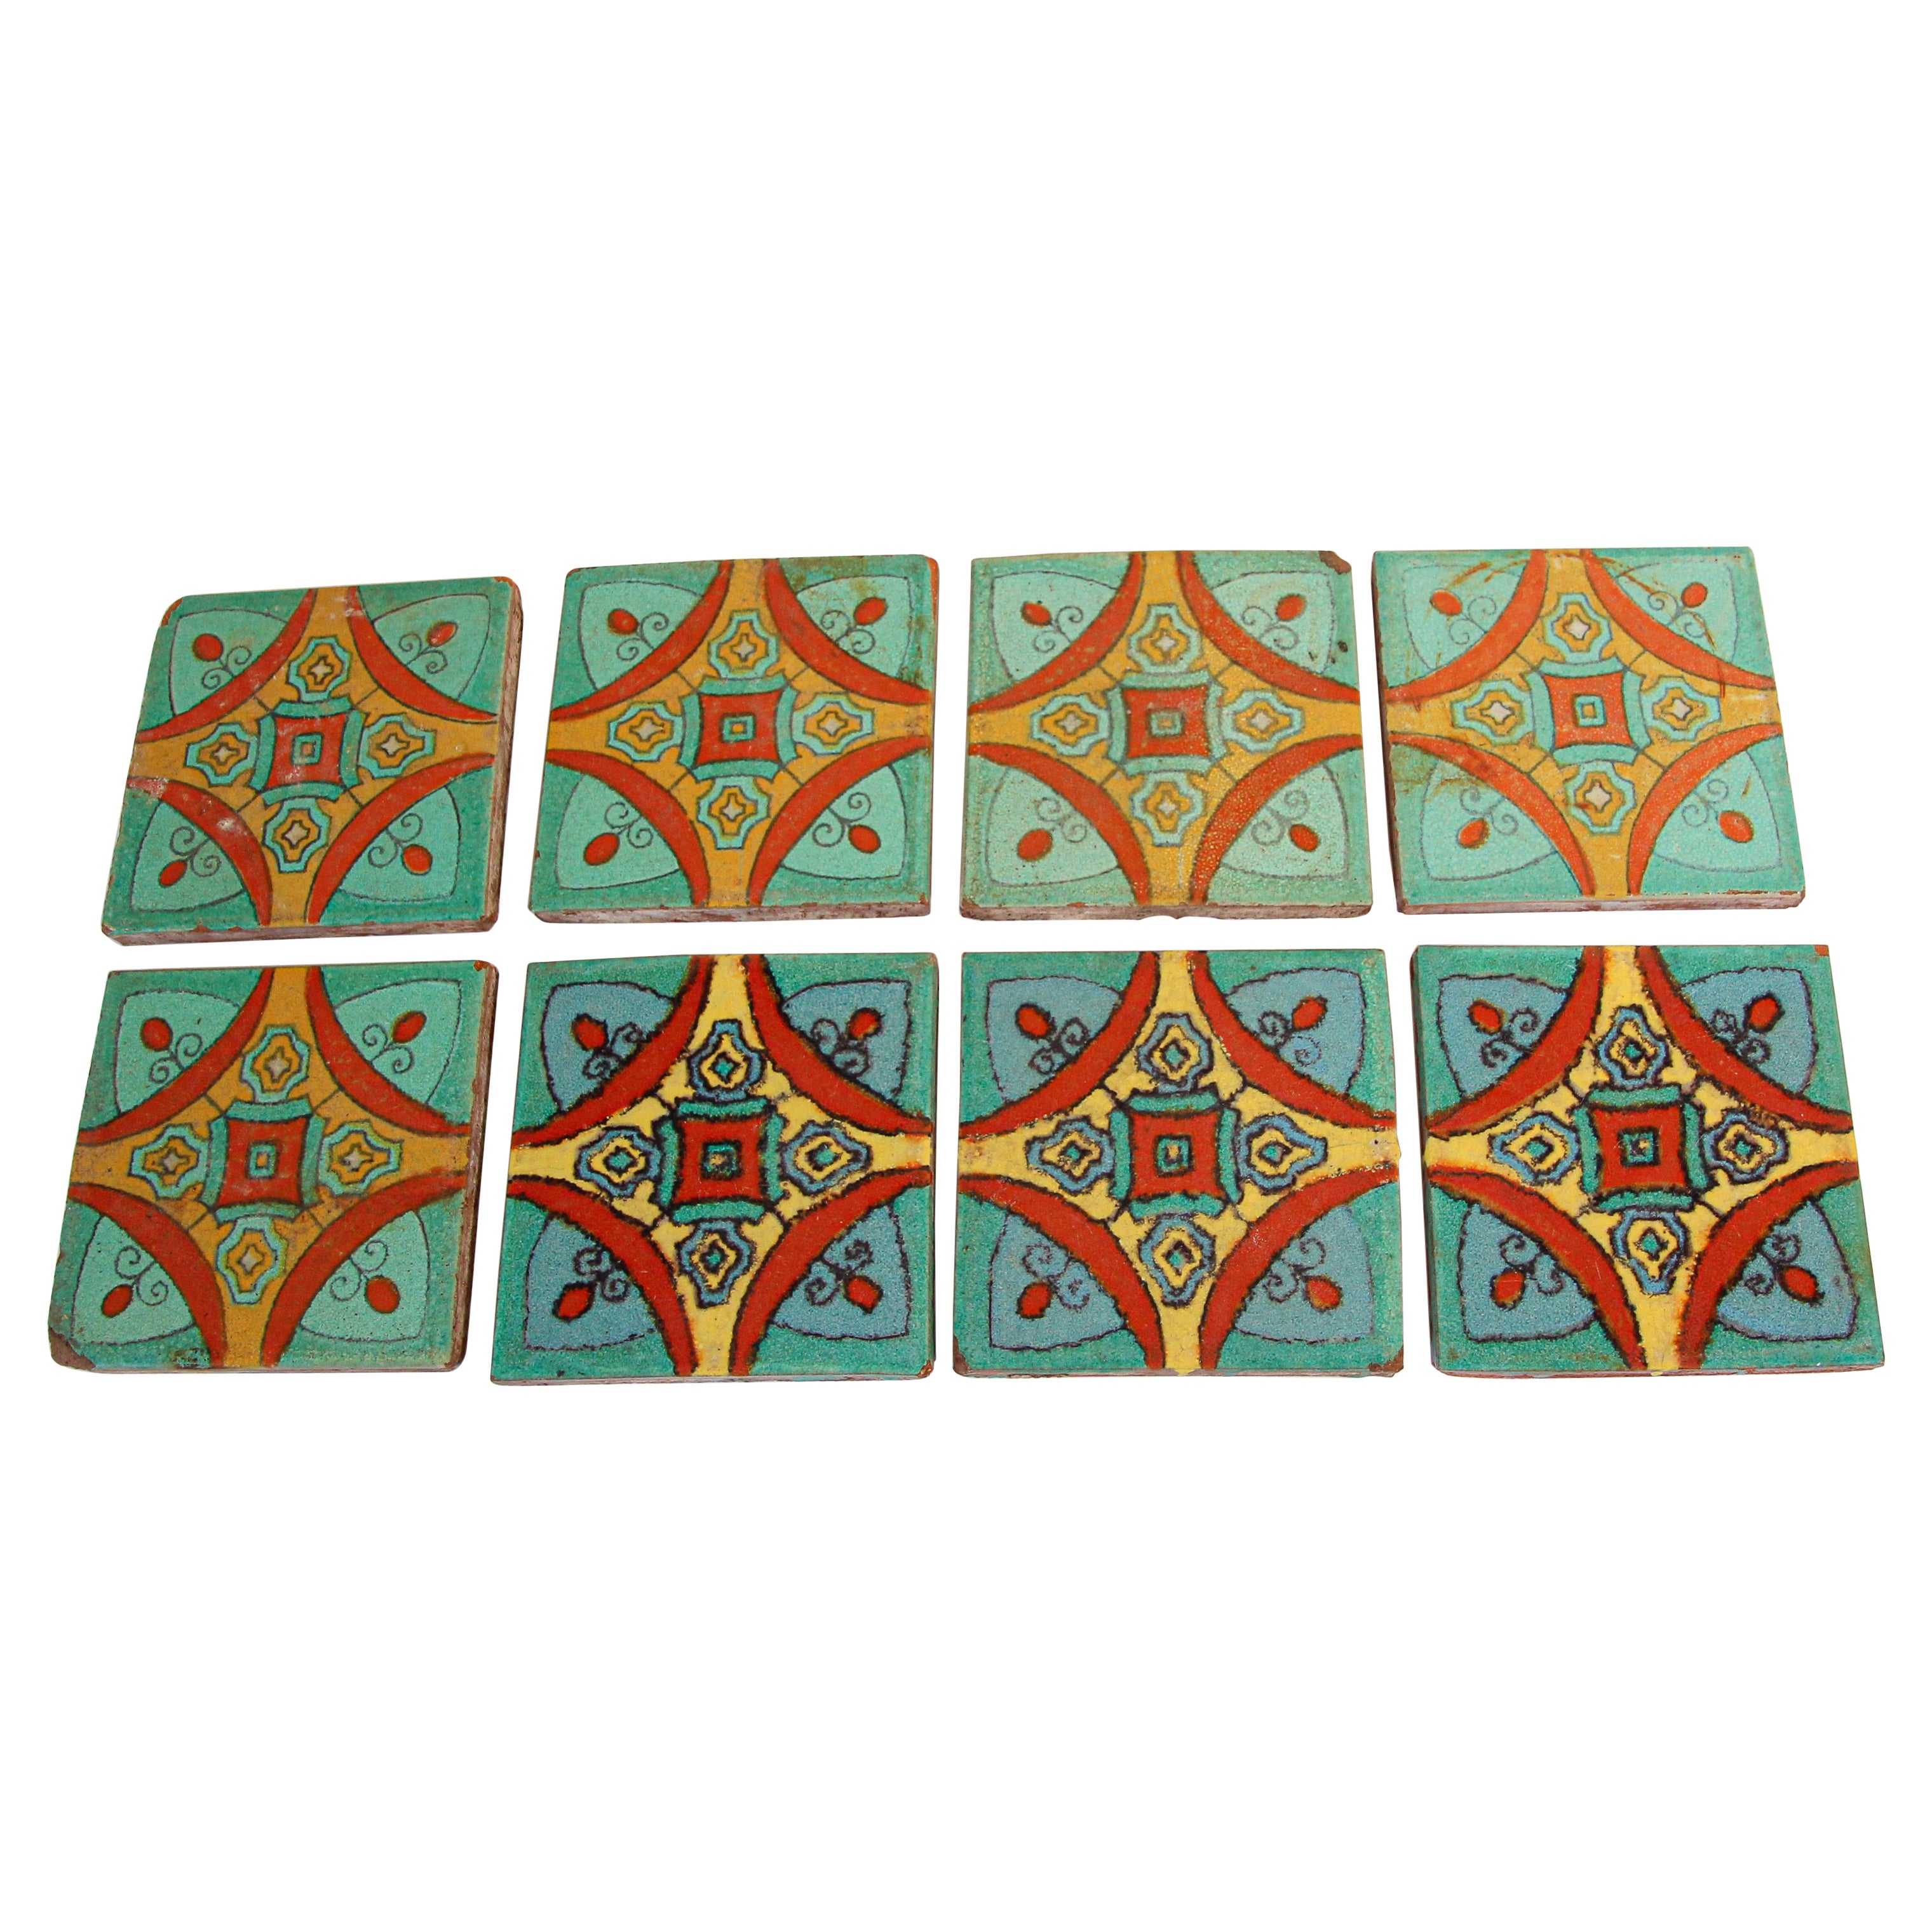 Talavera Handcrafted Spanish Wall Tiles Set of 8